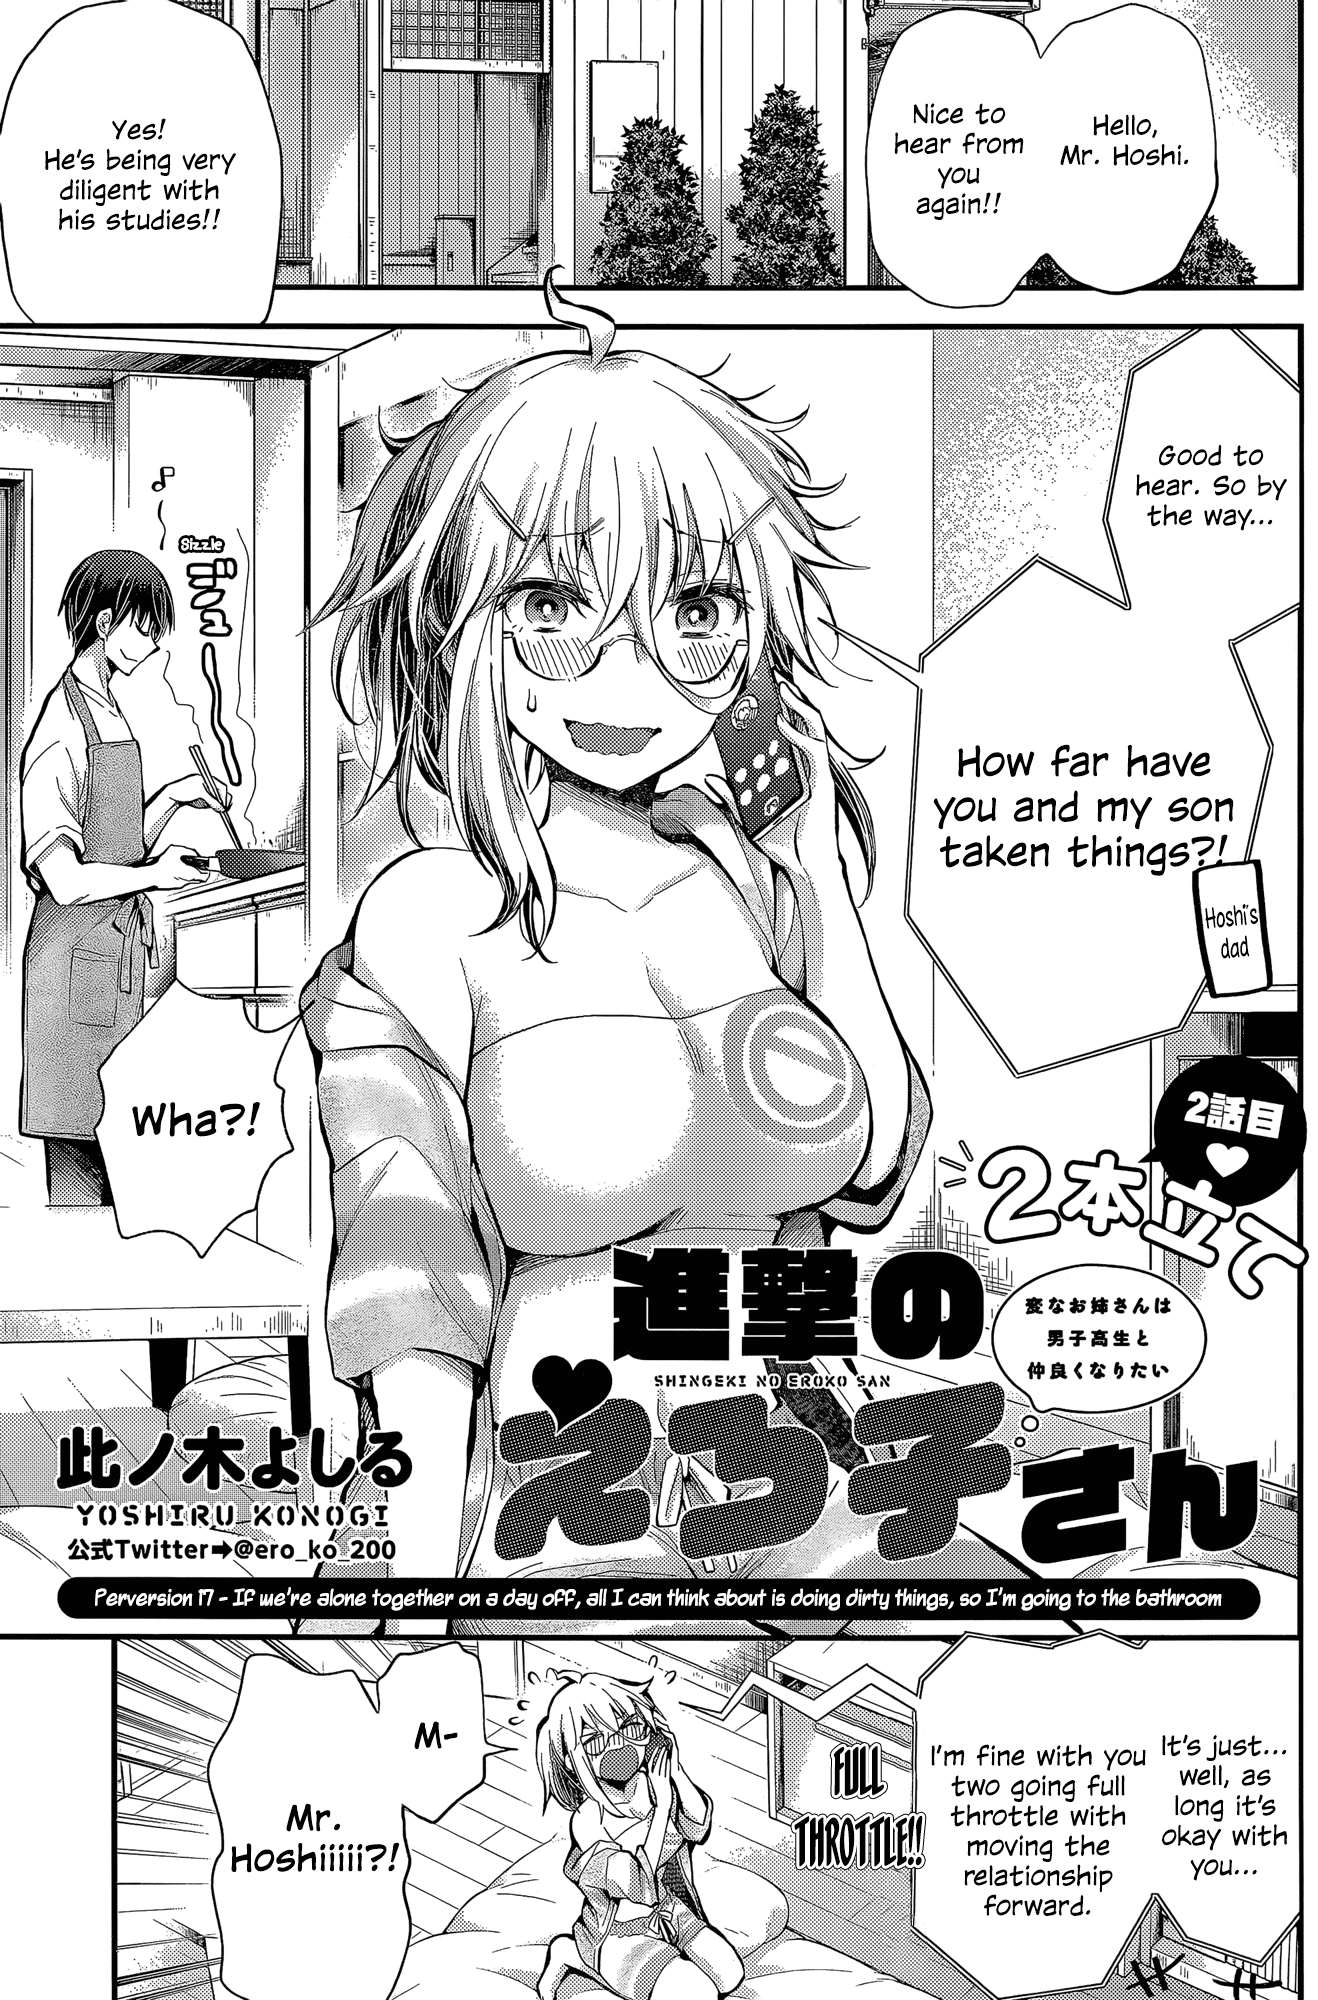 Shingeki No Eroko-San Chapter 17: Perversion 17: If We’Re Alone Together On A Day Off, All I Can Think About Is Doing Dirty Things, So I’M Going To The Bathroom - Picture 1